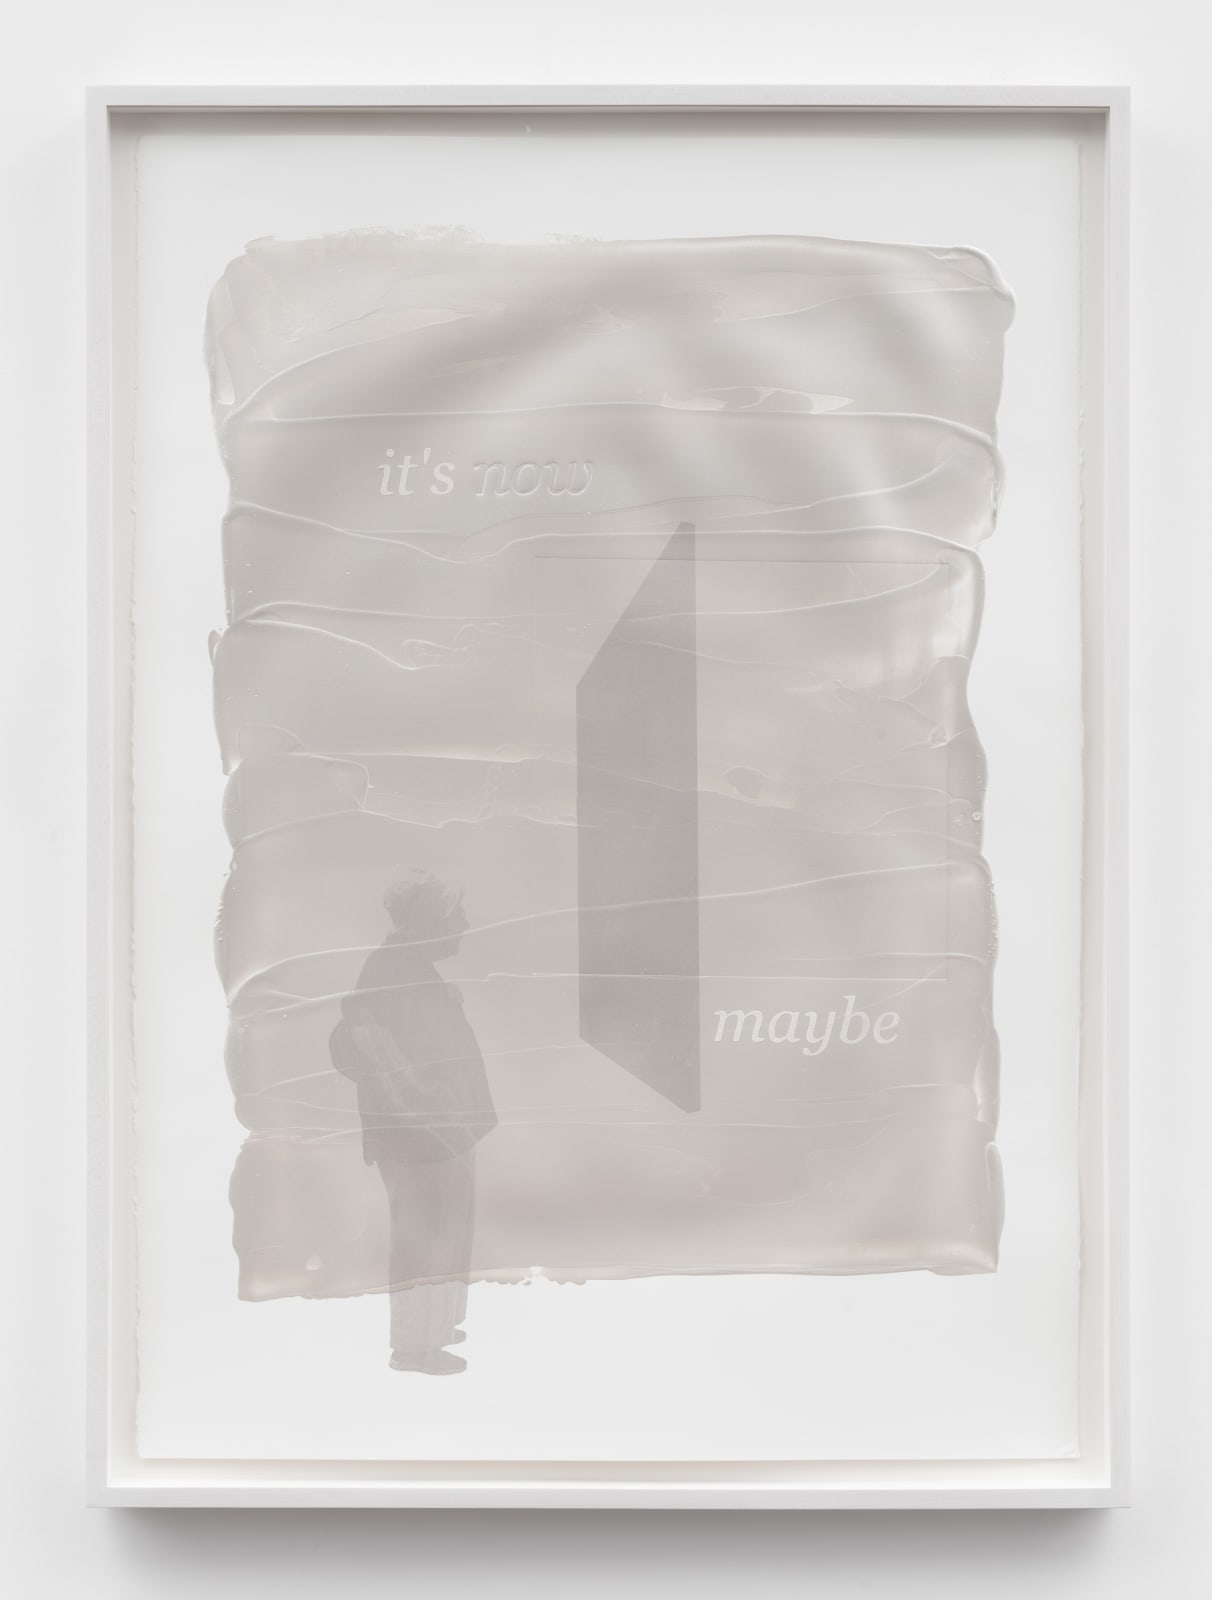 Andrea Geyer, Shadow Box (it’s now, maybe), 2019